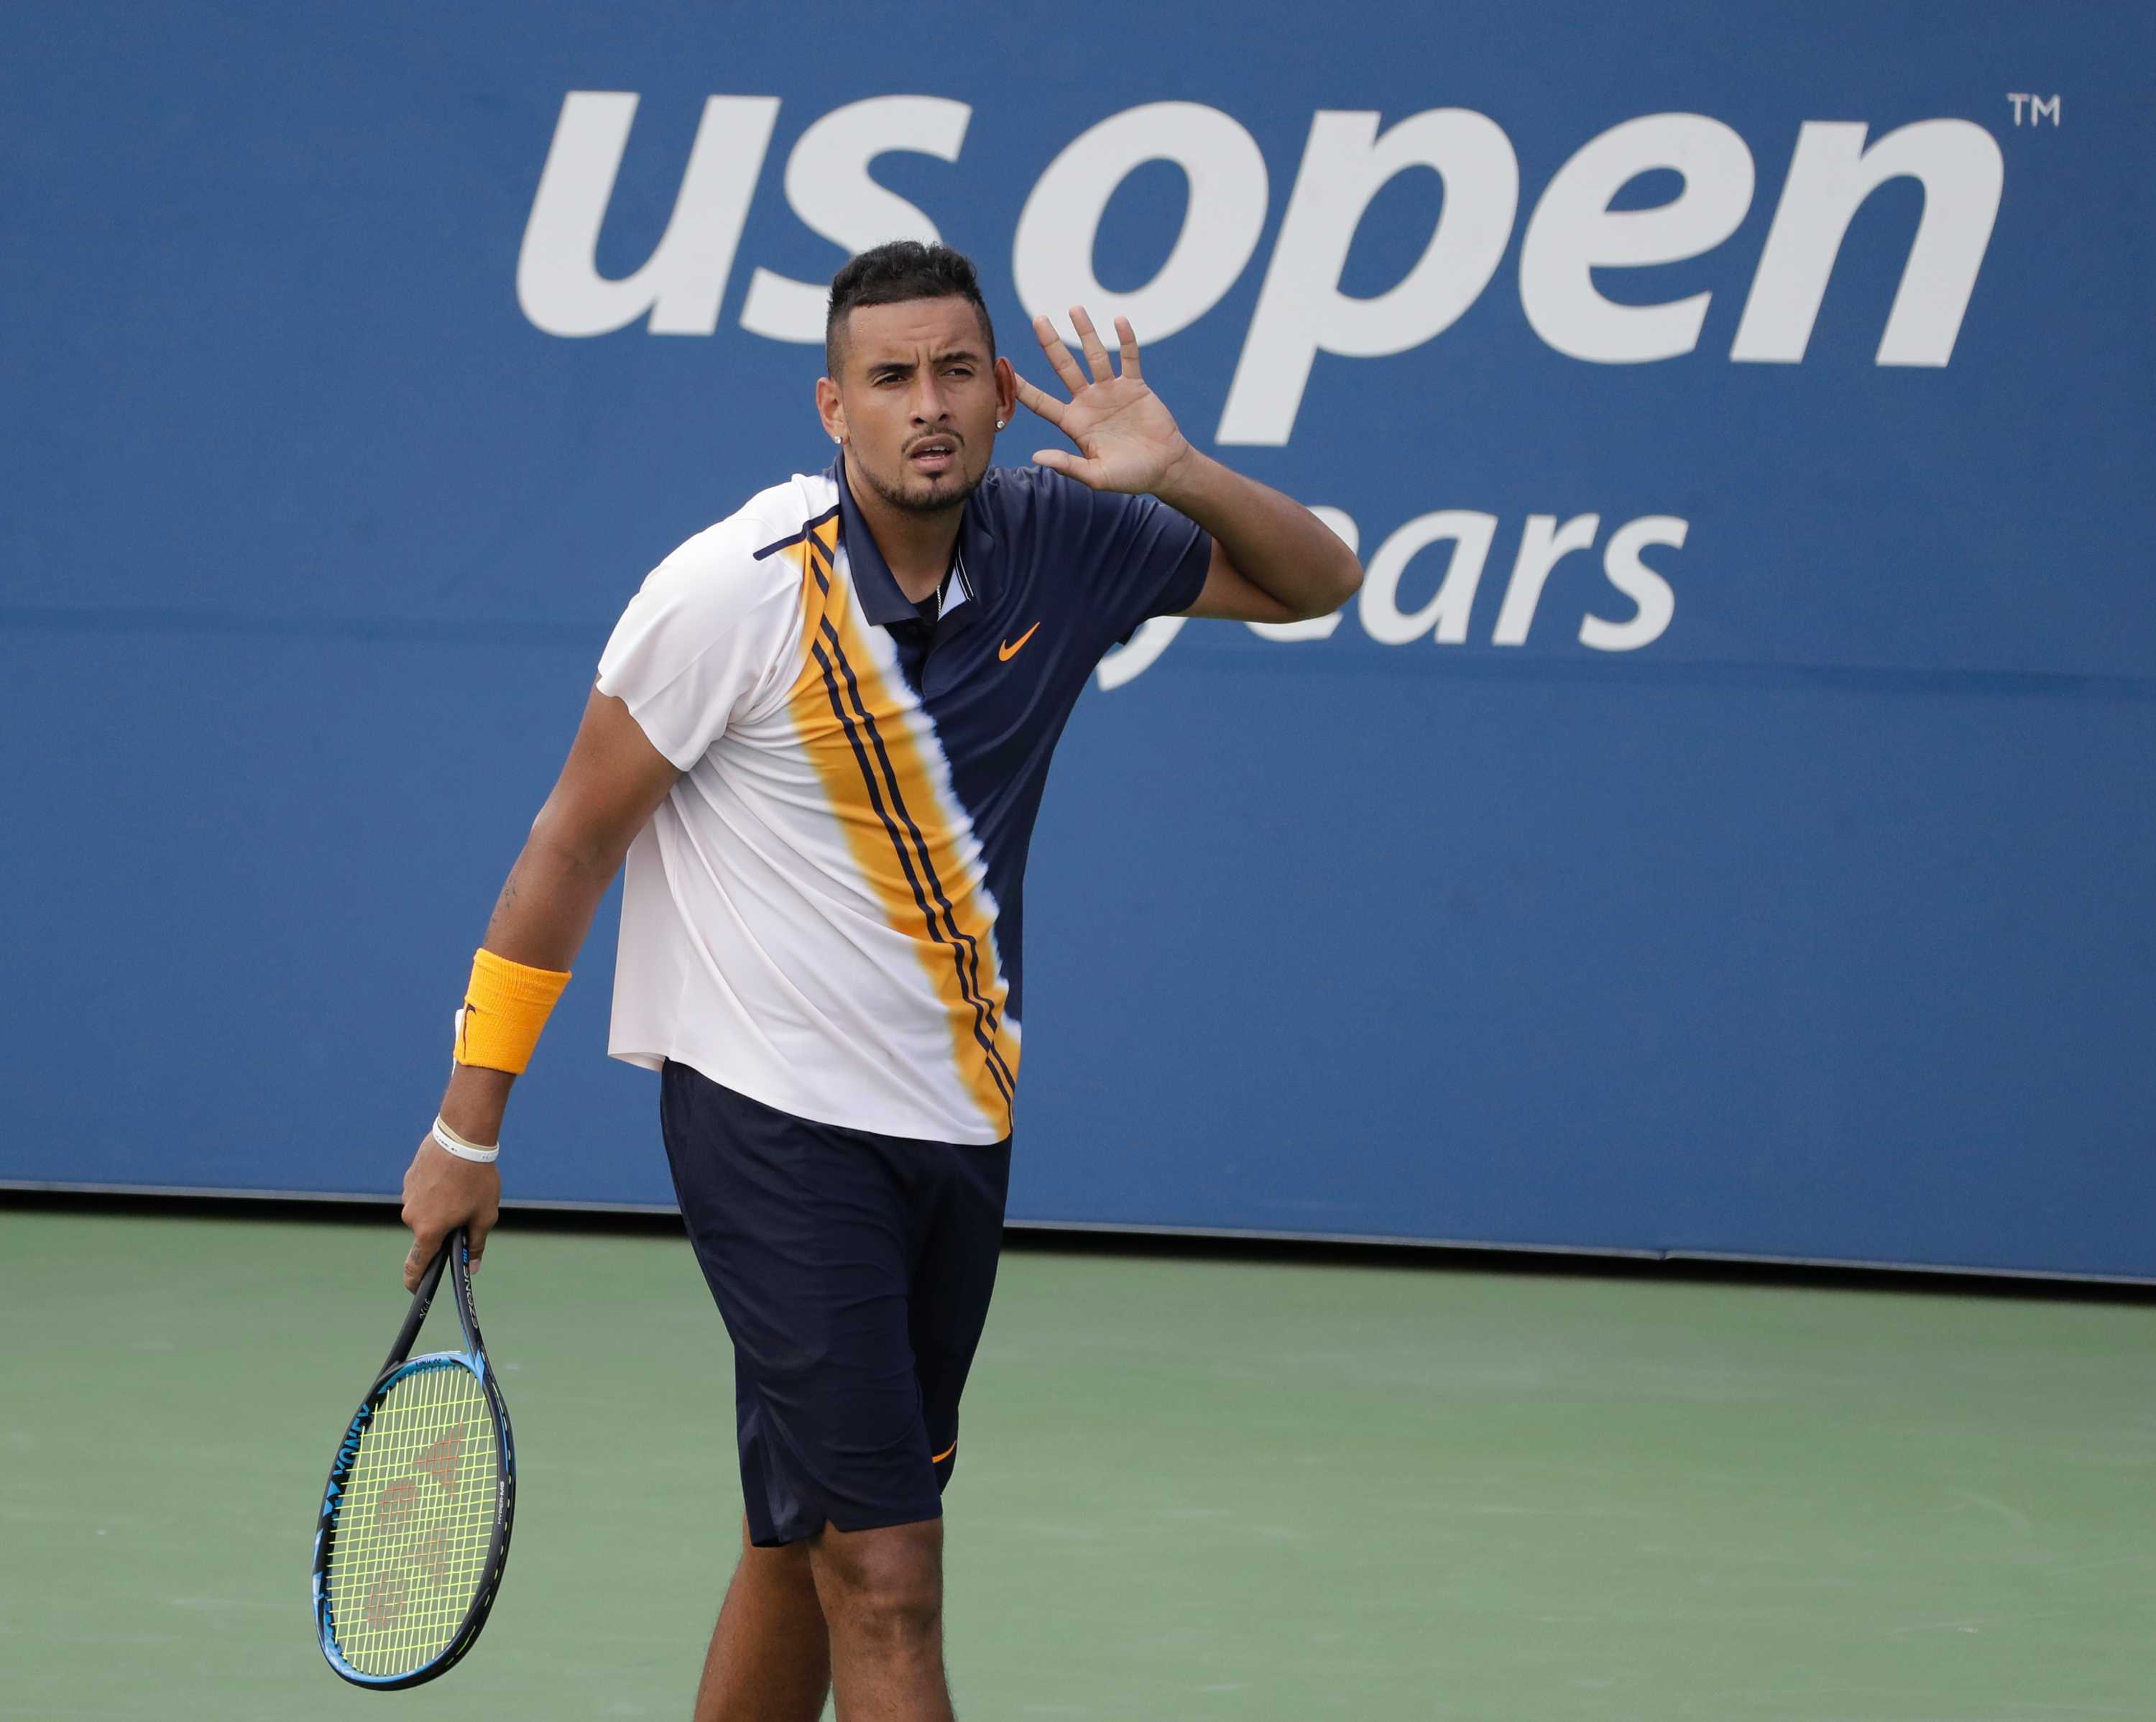 US Open Nick Kyrgios earns controversial win after receiving umpire pep talk